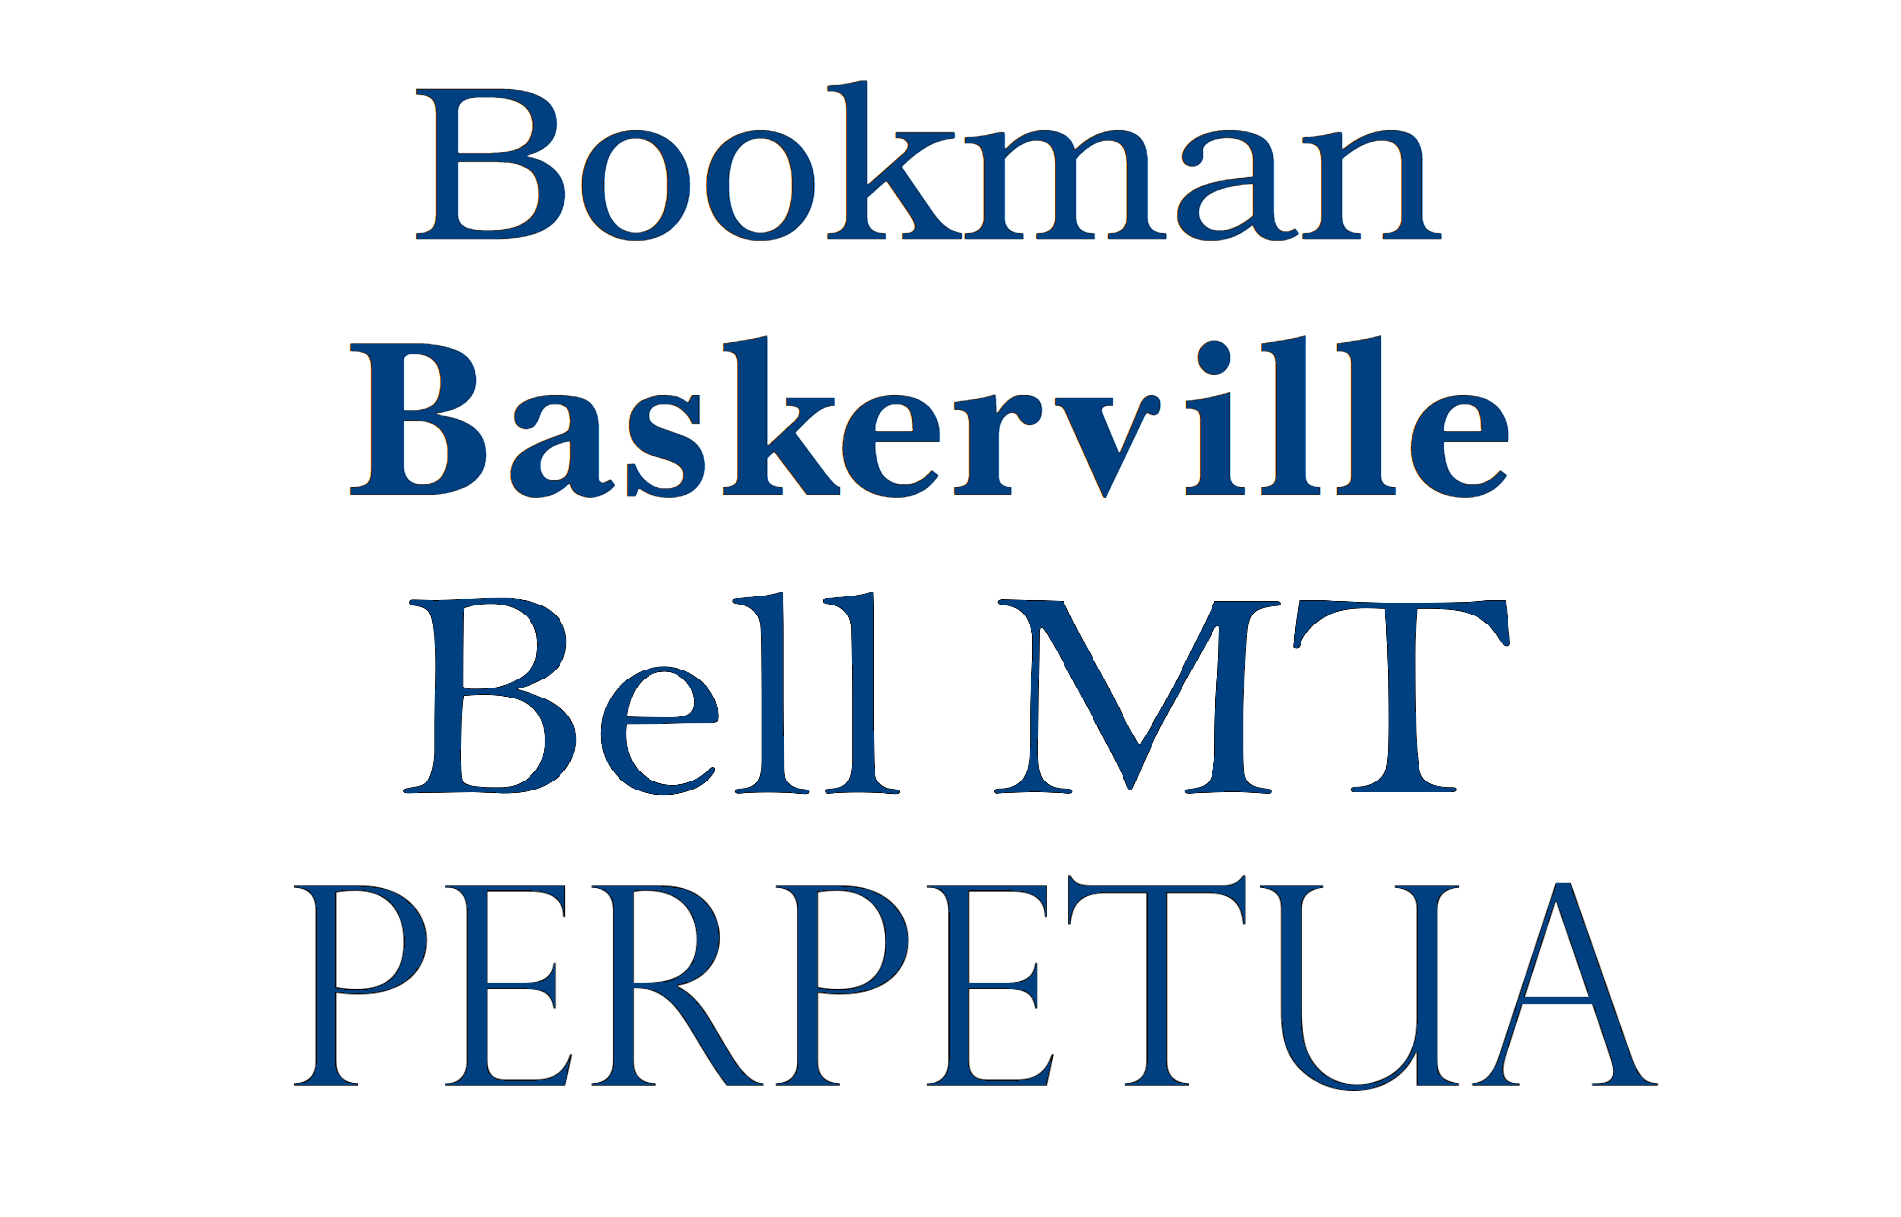 Examples of transitional serifs